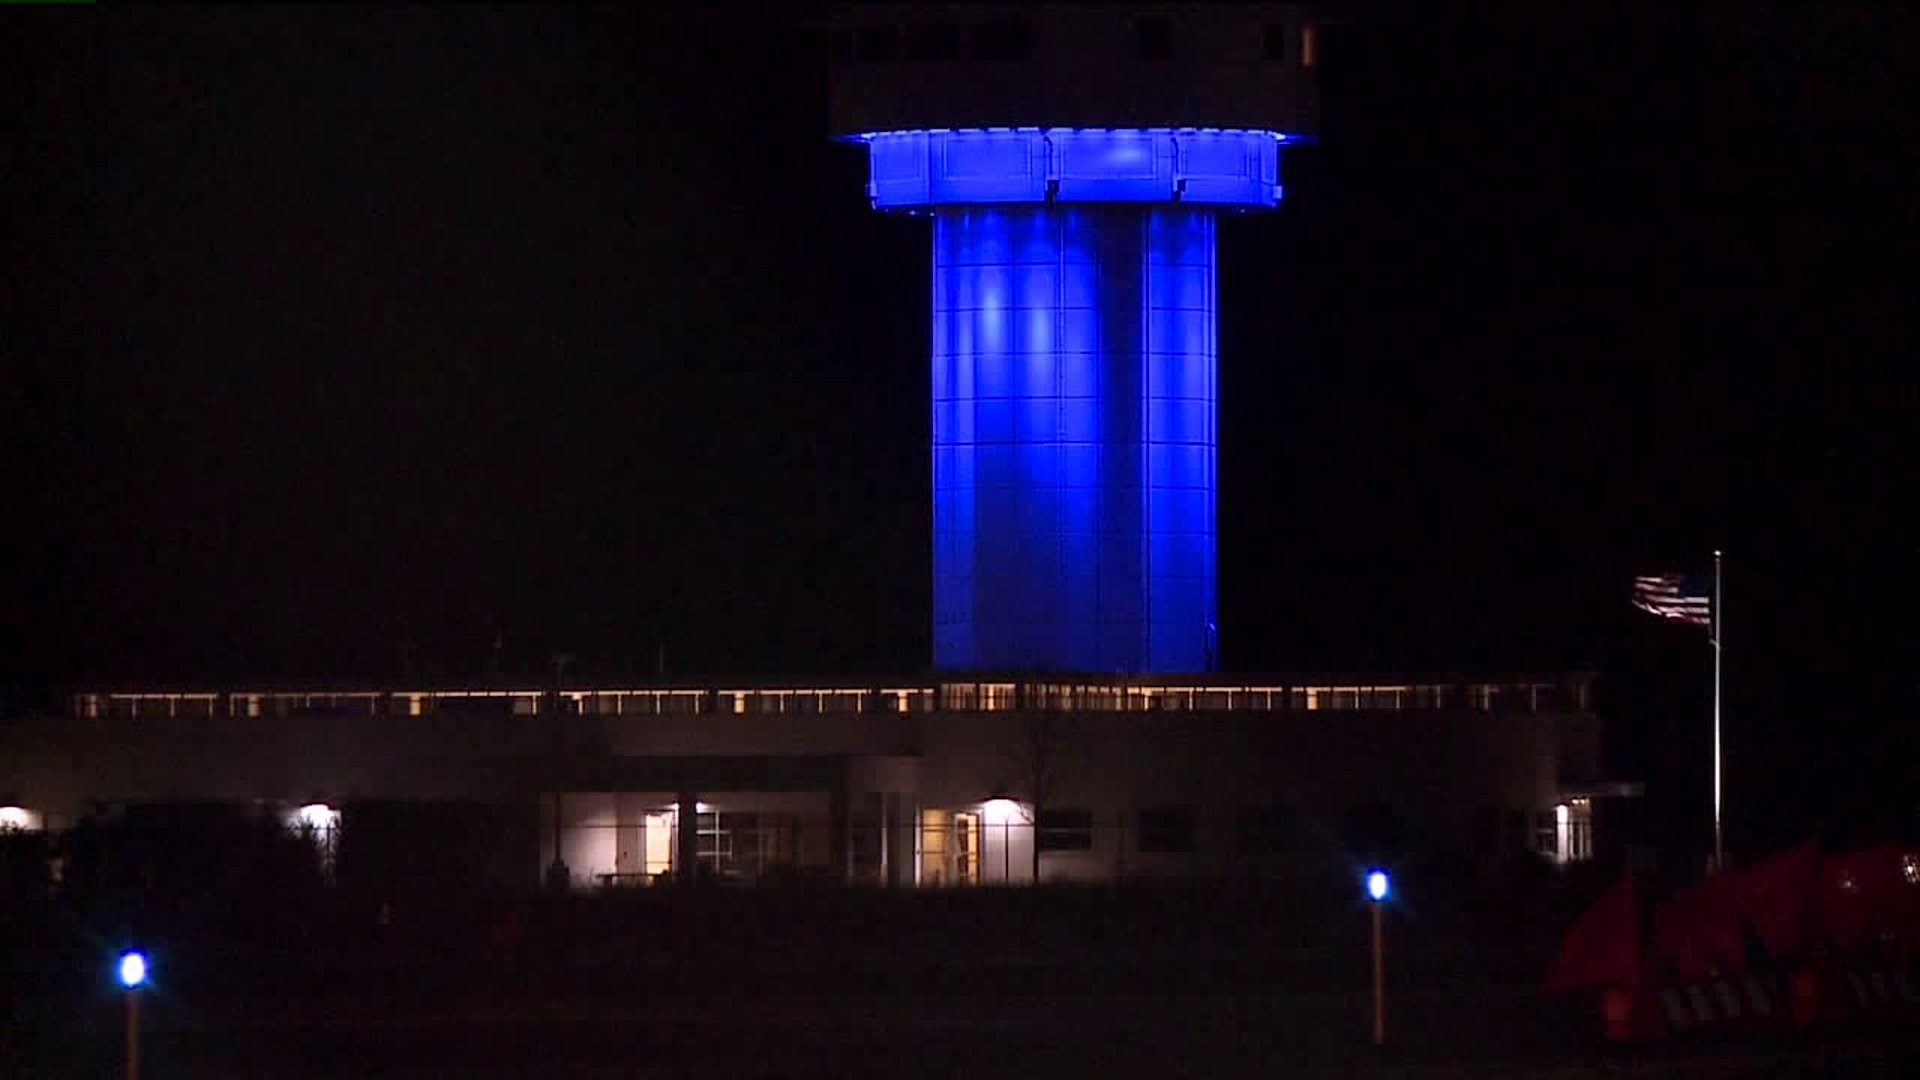 Airport Tower Goes Blue for Autism Awareness